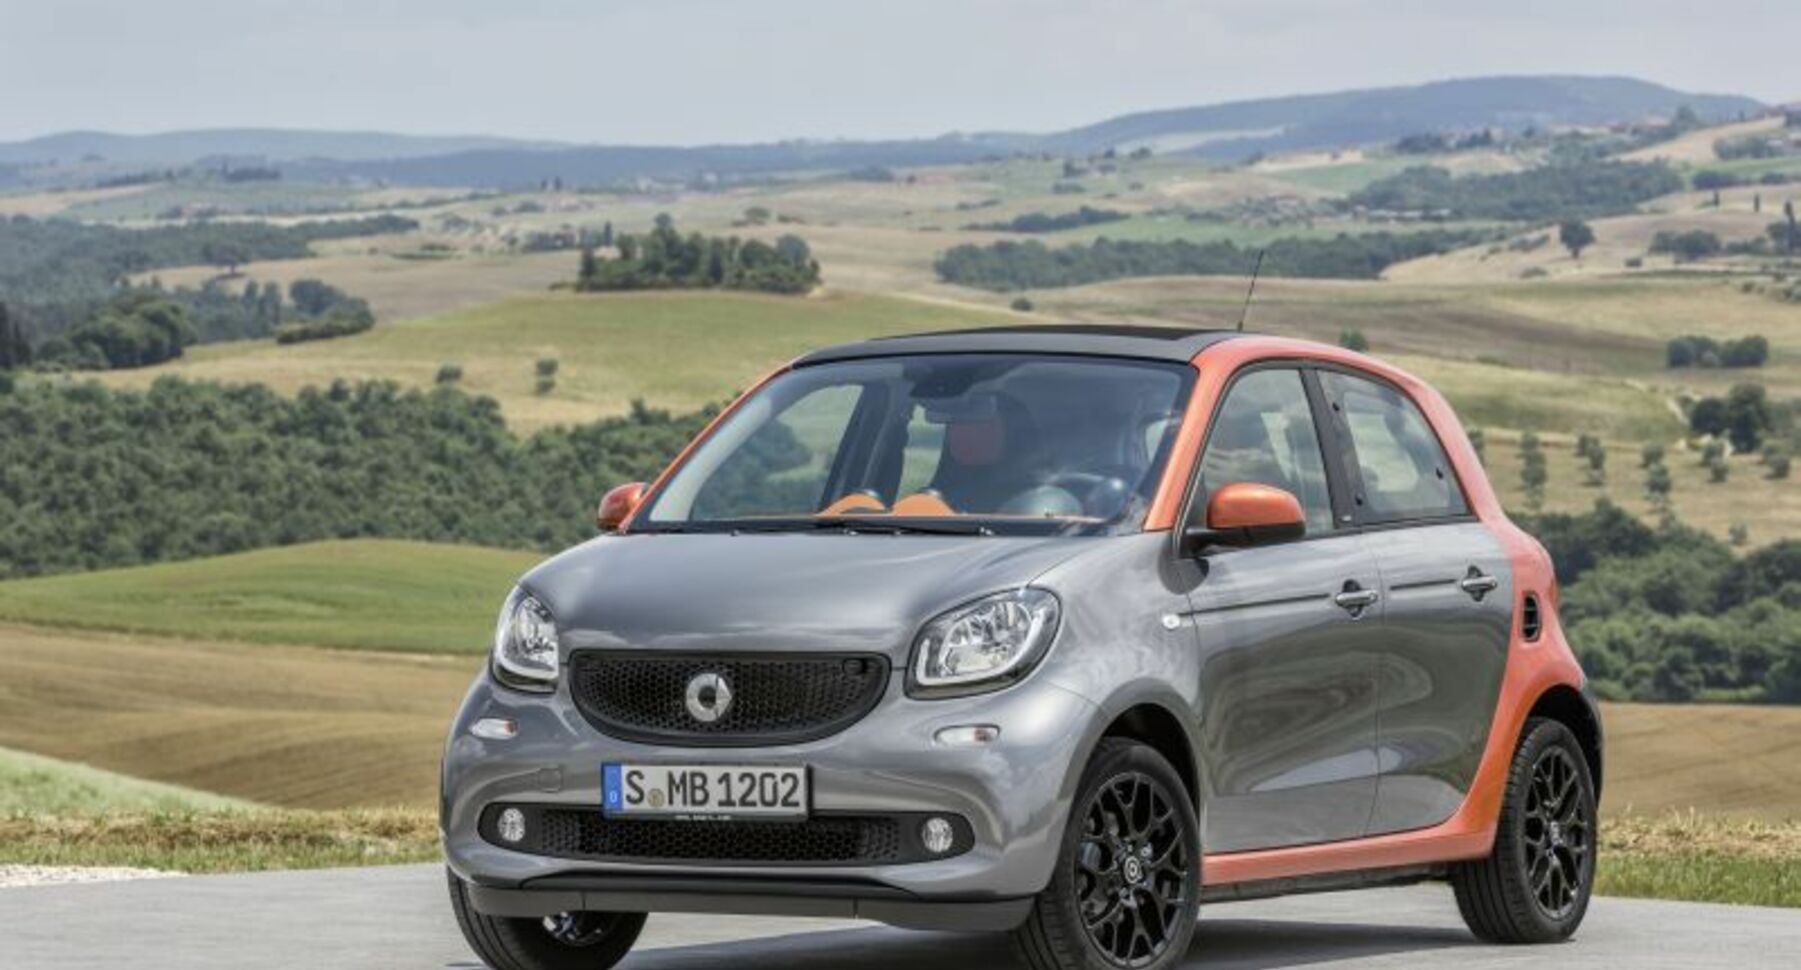 Smart Forfour II (W453) EQ 17.6 kWh (82 Hp) electric drive 2017, 2018